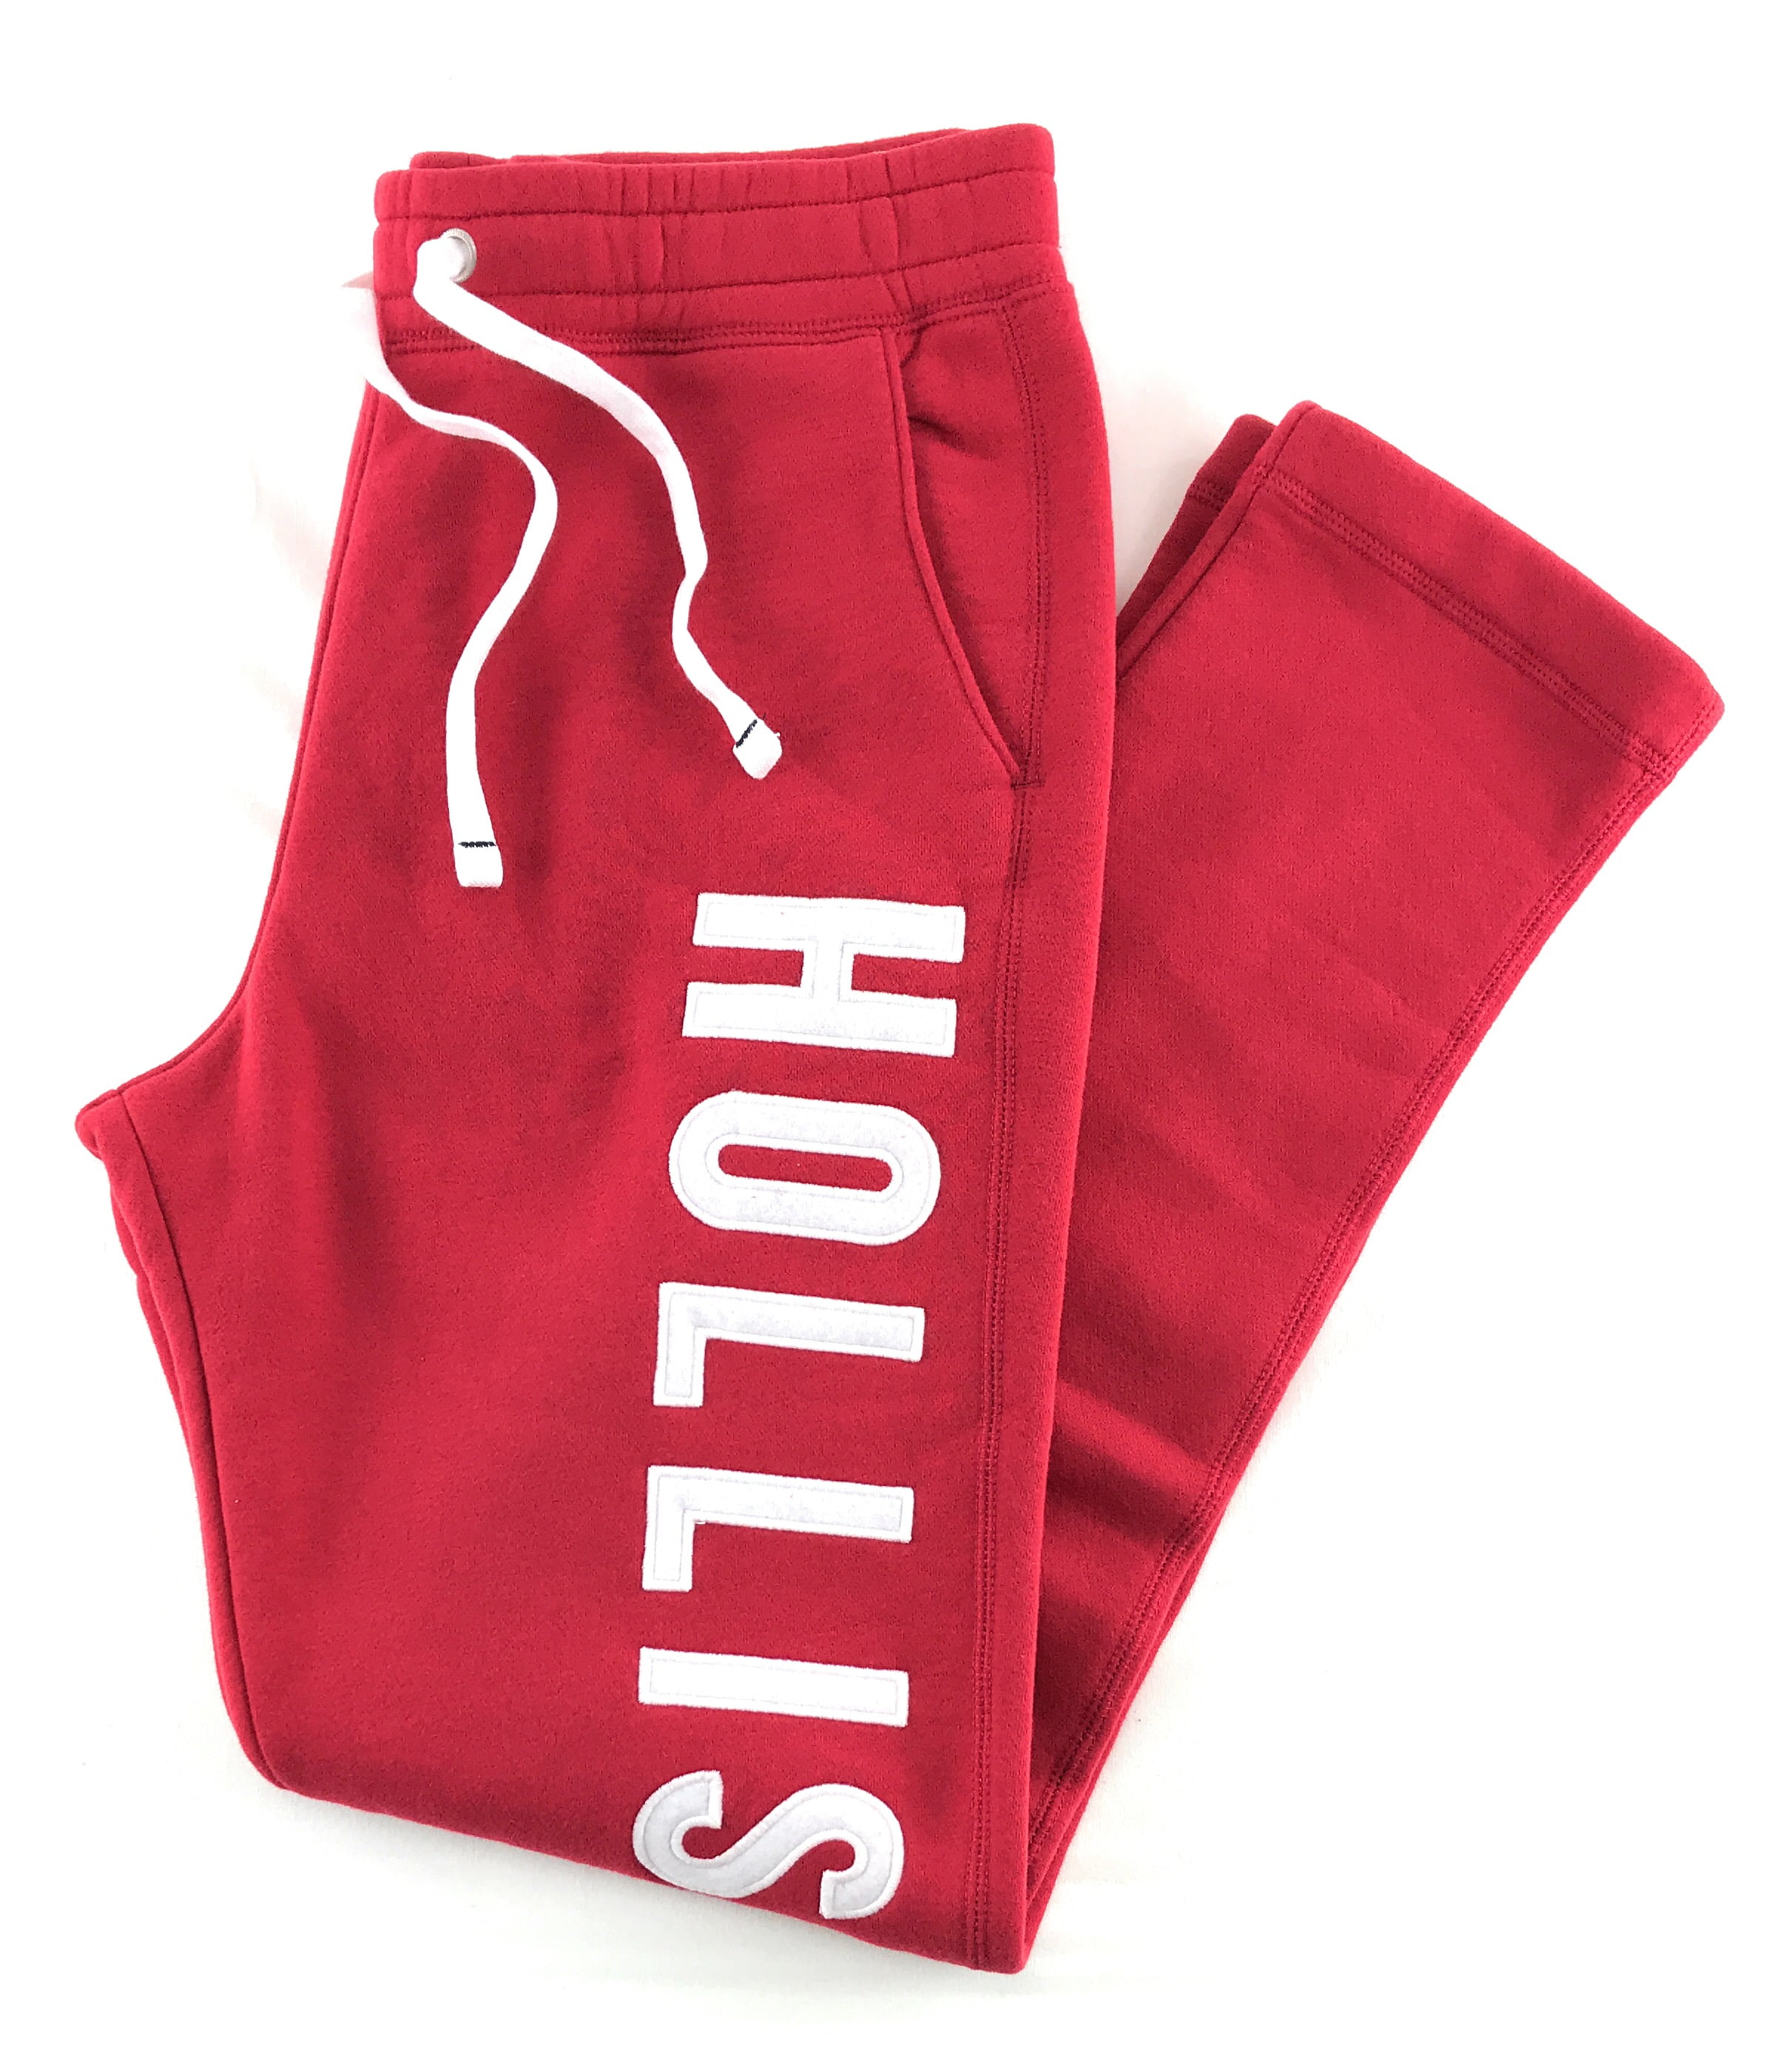 hollister red sweatpants